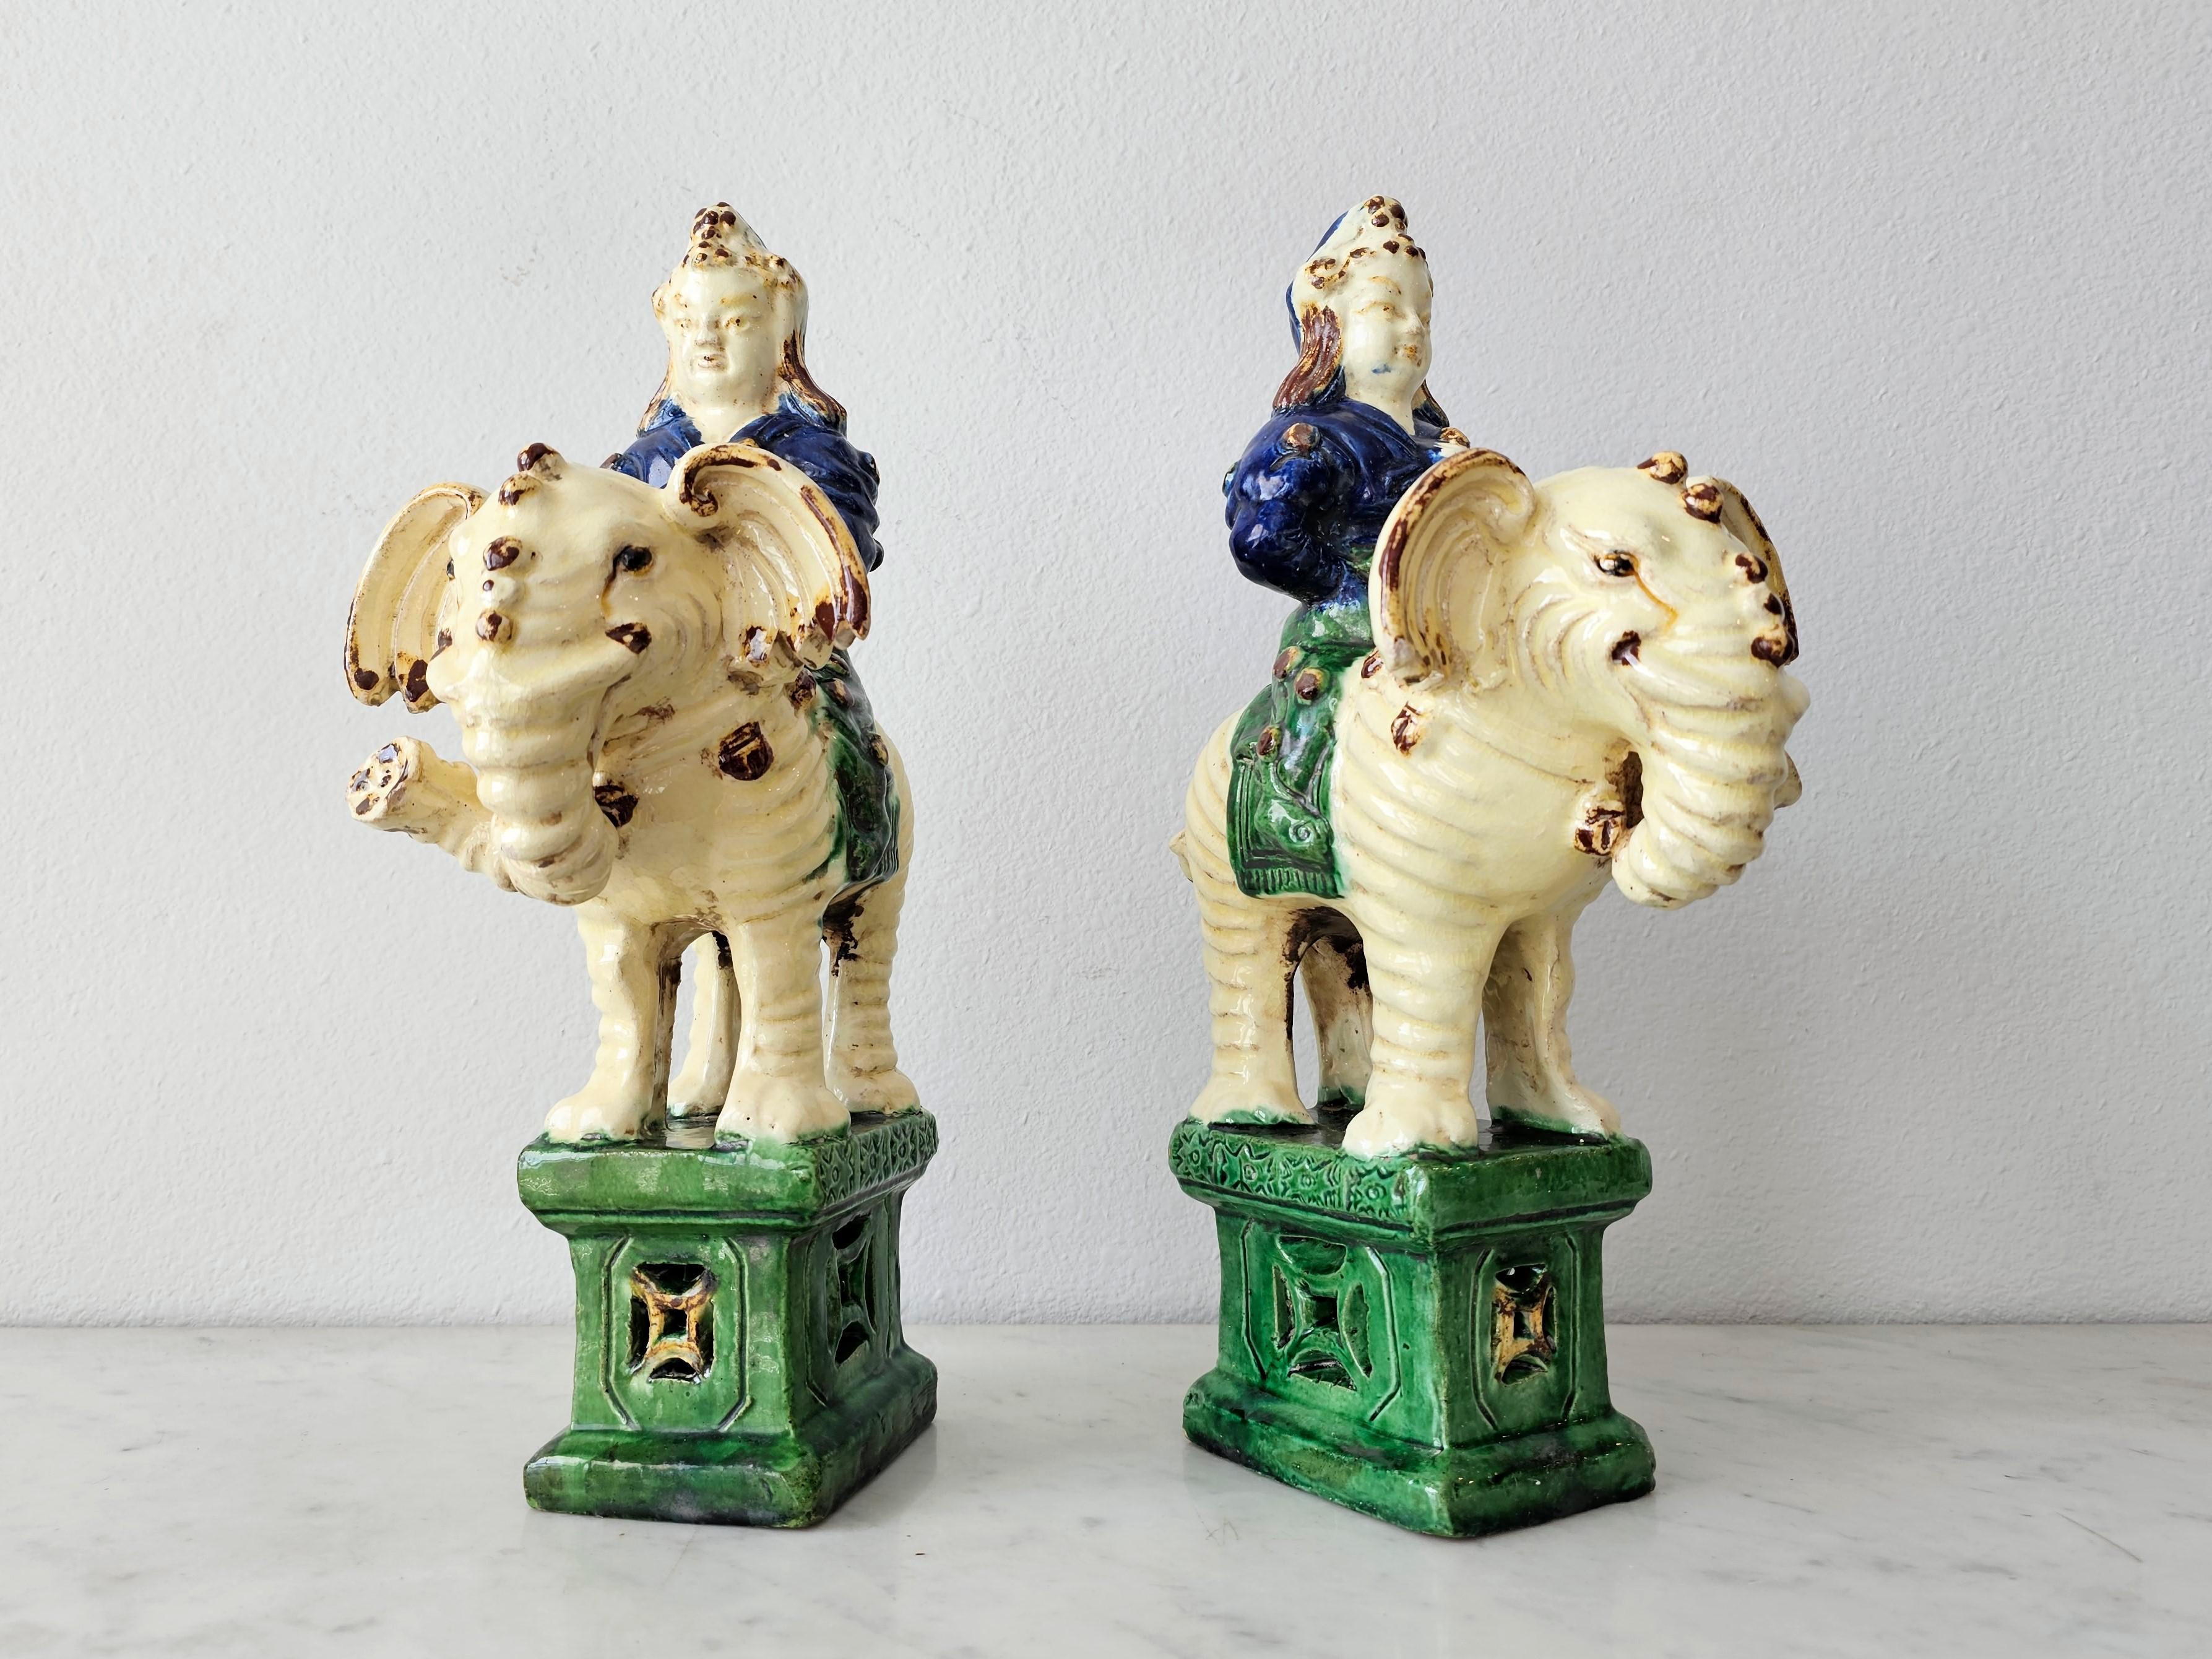 A pair of antique Qing Dynasty (1644-1912) glazed ceramic figural incense burners. 

China, 19th century, original mirrored pair, each in the sculptural form of a seated Qing warrior figure riding an elephant, polychrome decorated, rising on